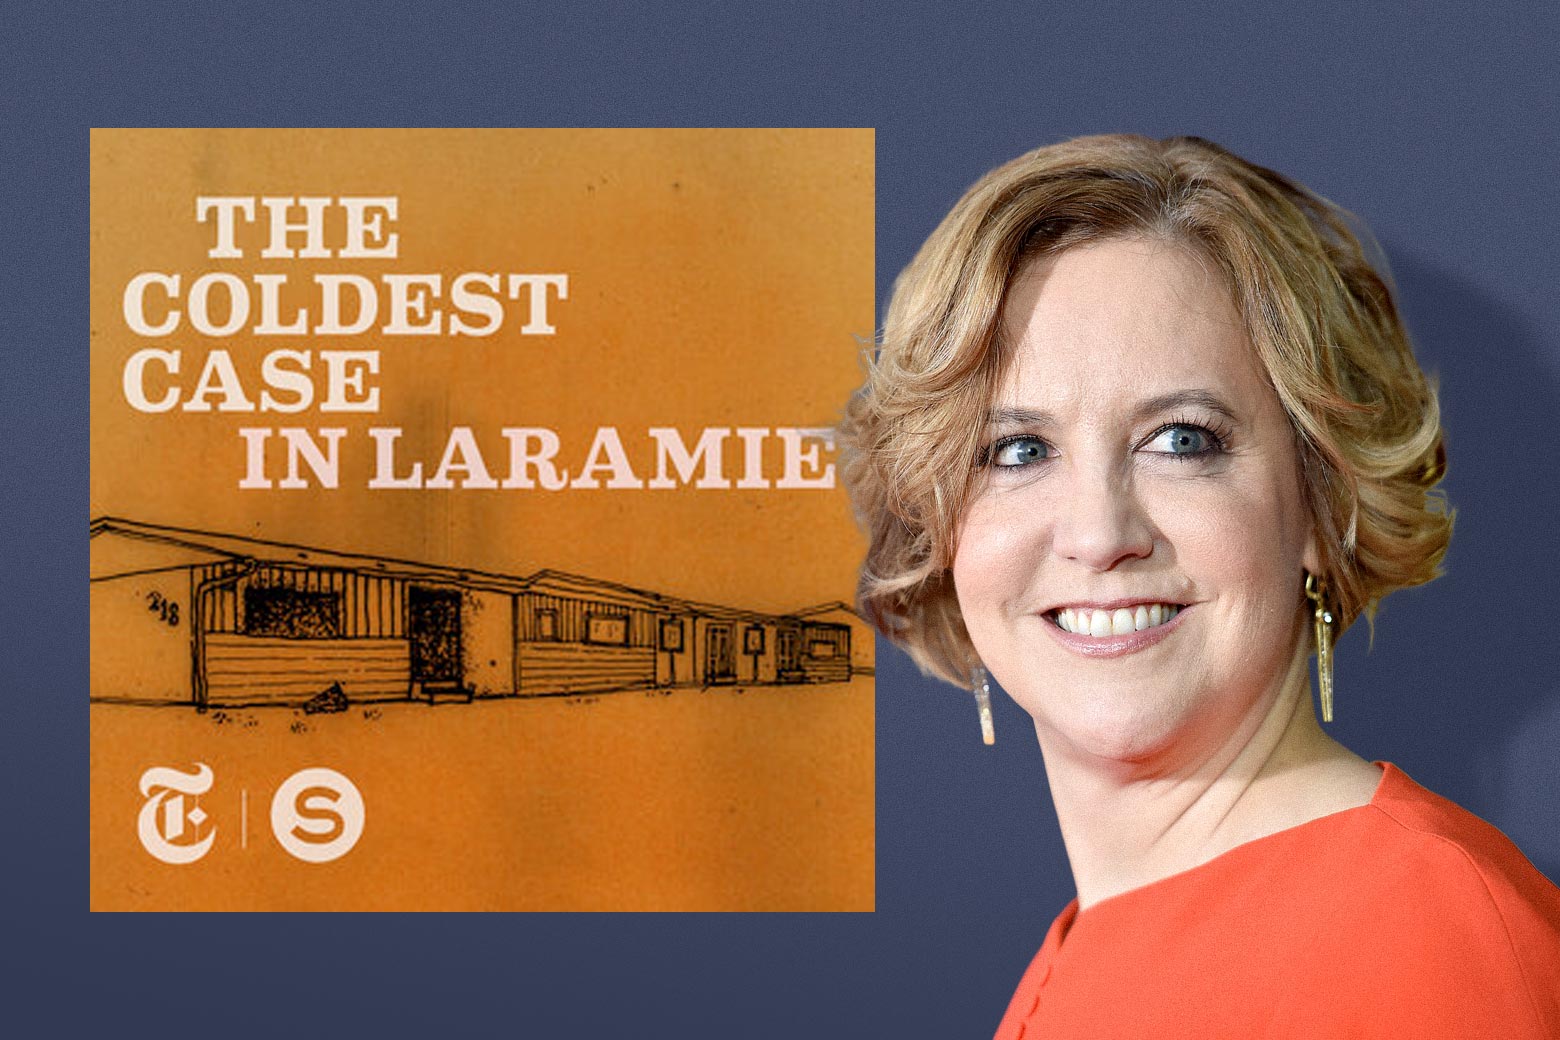 On the left, the podcast art for The Coldest Case in Laramie depicts a desolate landscape with a line of simple one-story houses. On the right, a blonde woman in a red dress.